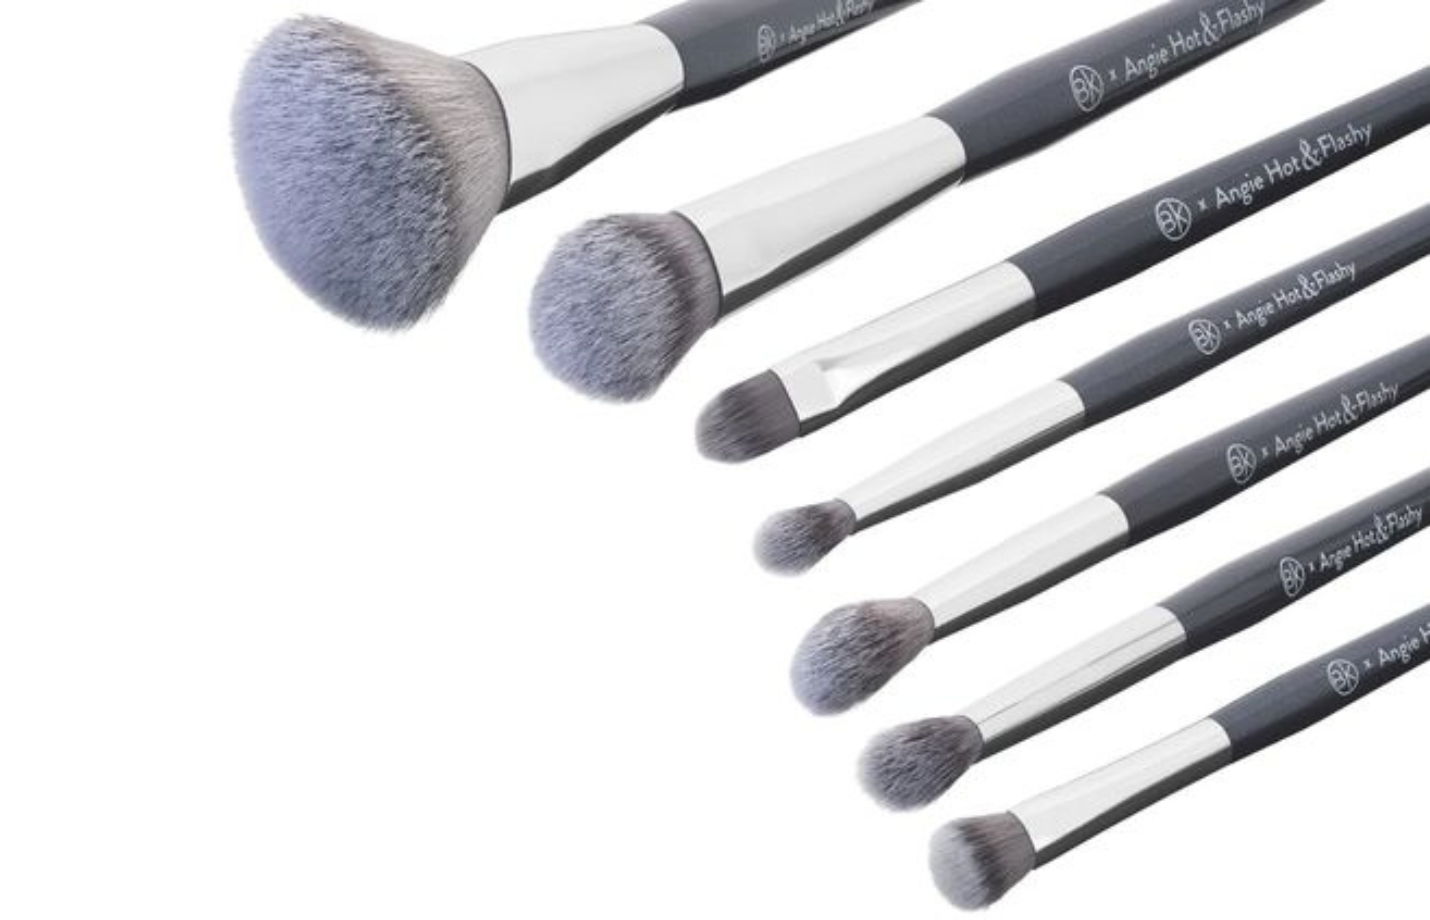 Angie Hot and Flashy Brushes at BK Beauty